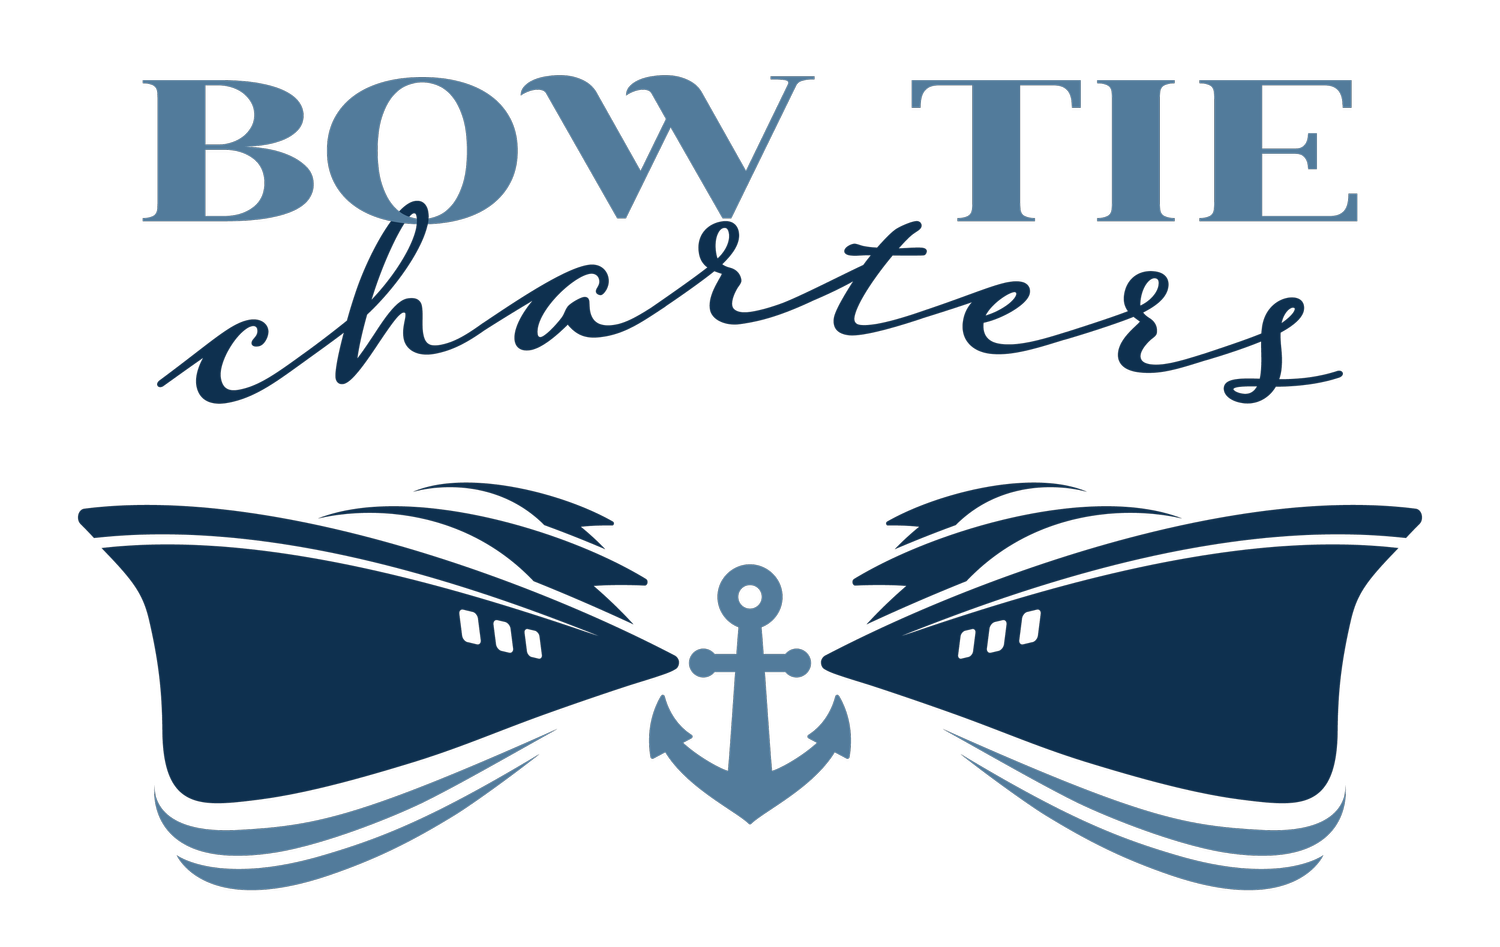 BOWTIE Charters